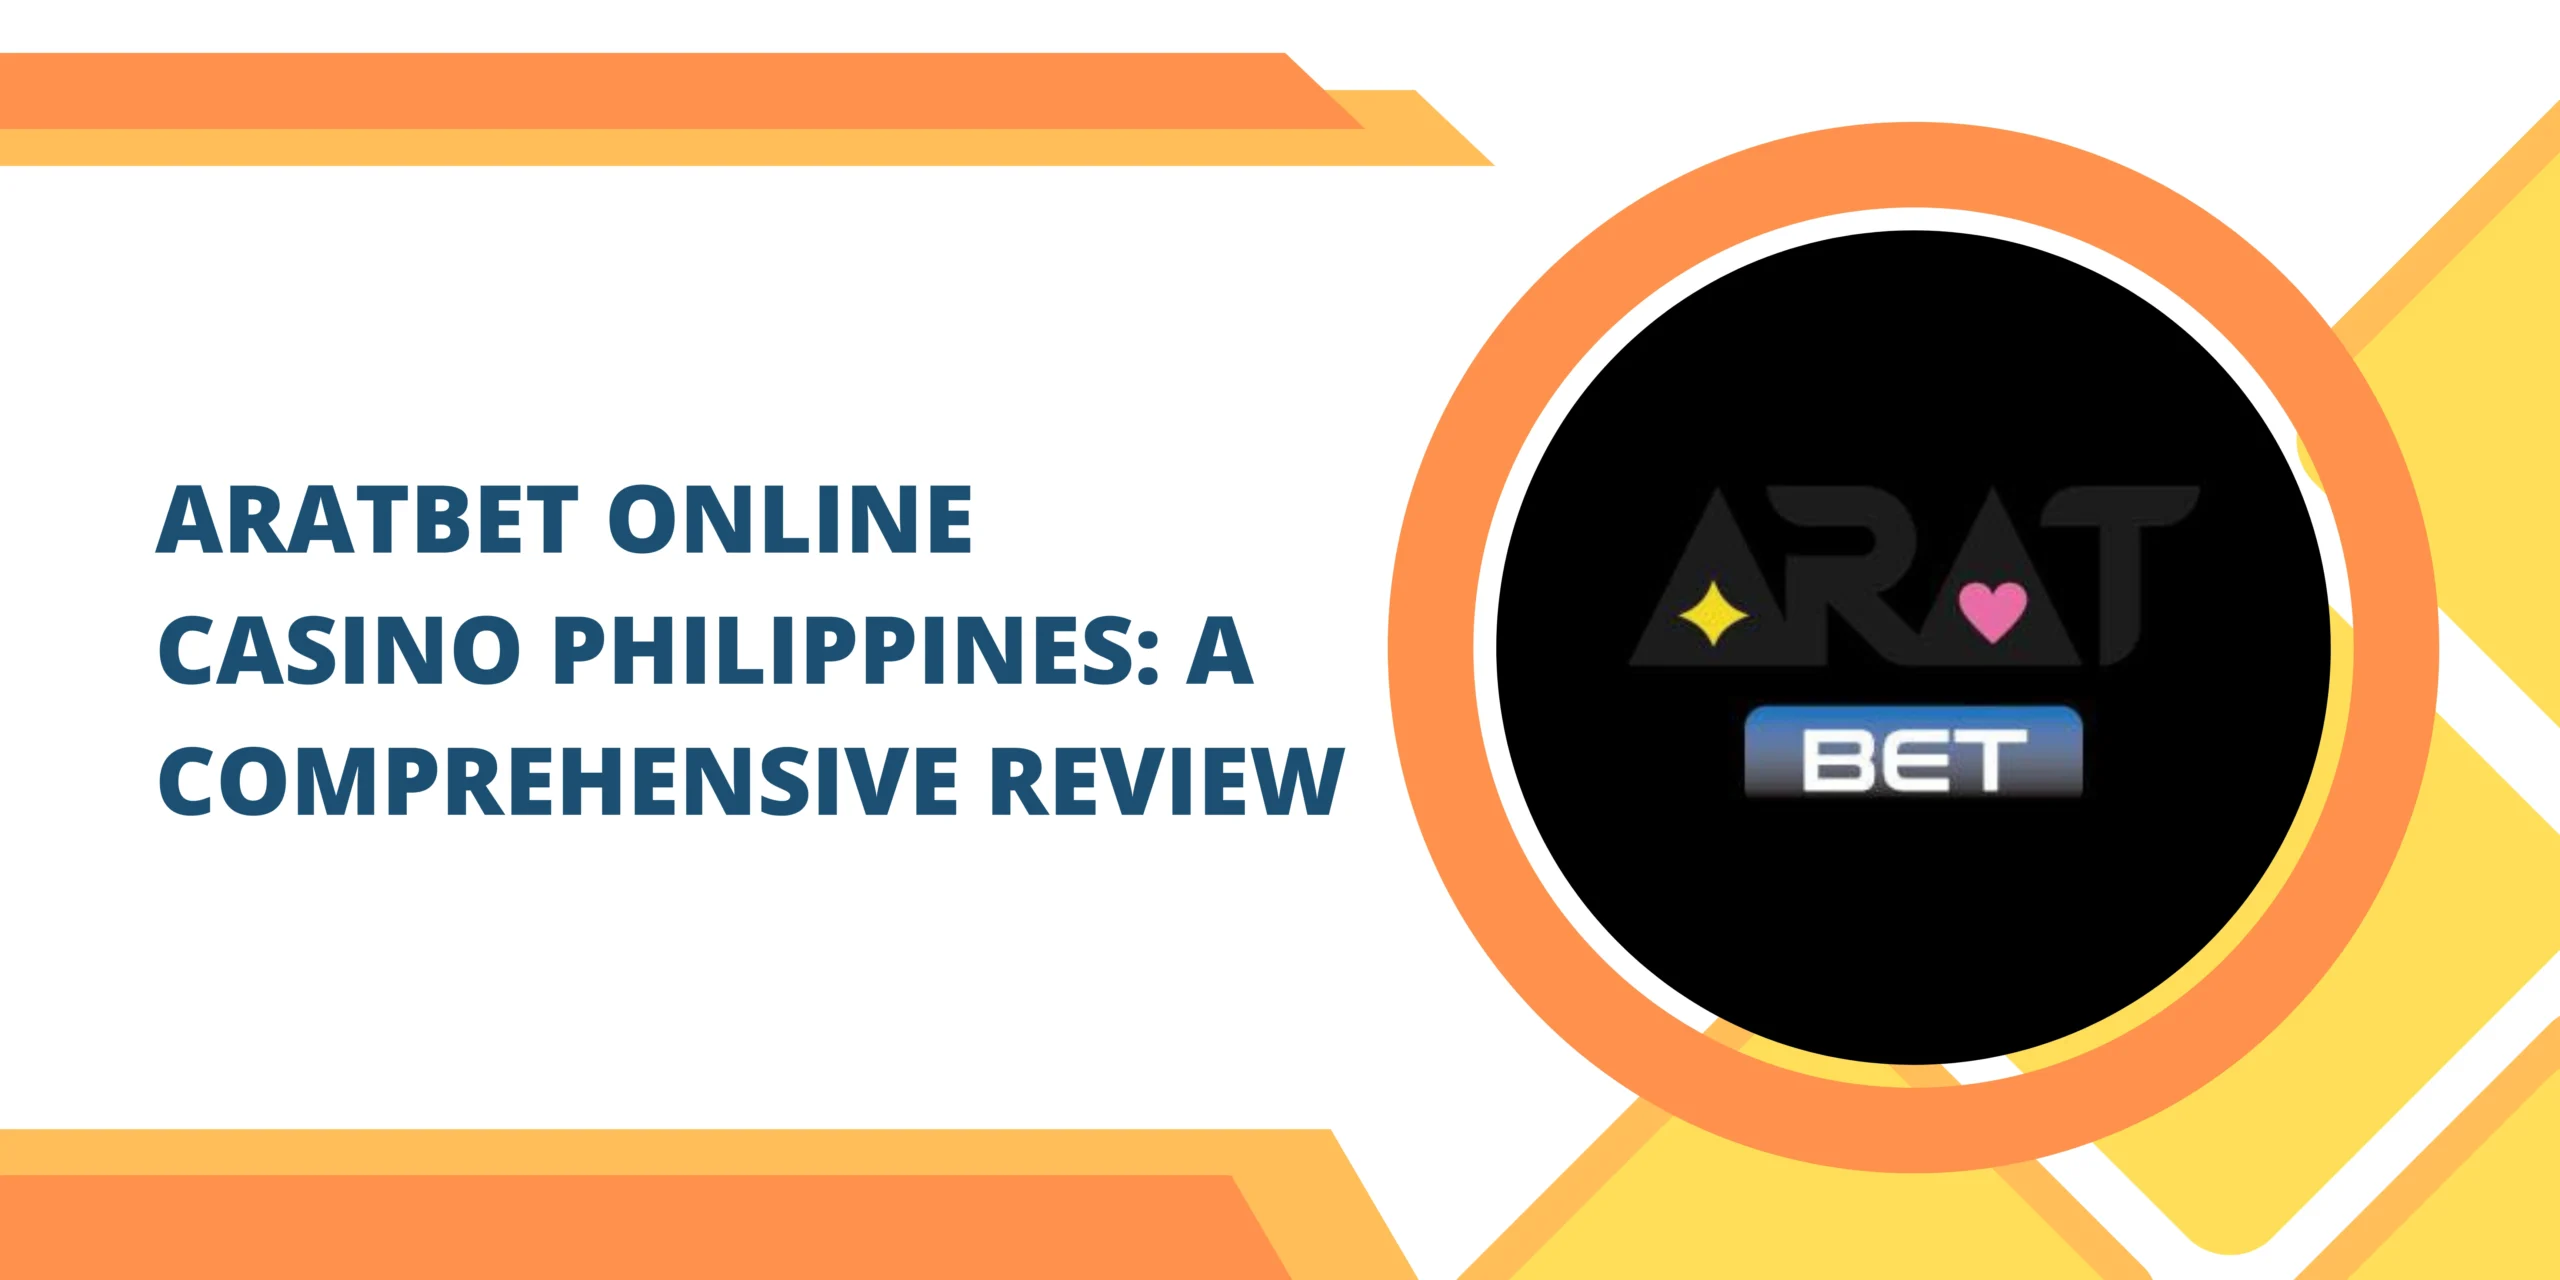 Aratbet Online Casino Philippines: A Comprehensive Review